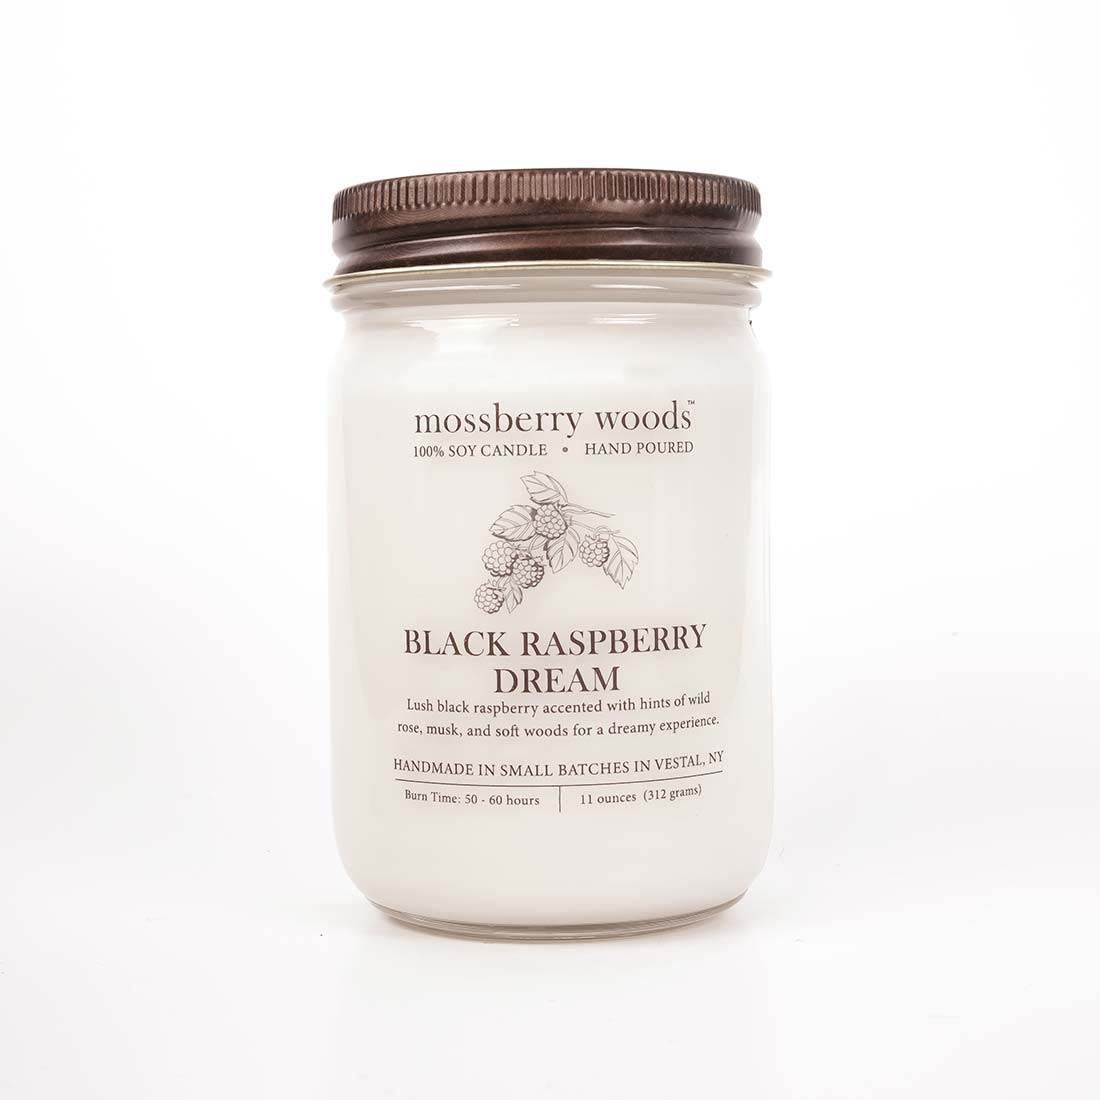 Black Raspberry Dream candle on a white background